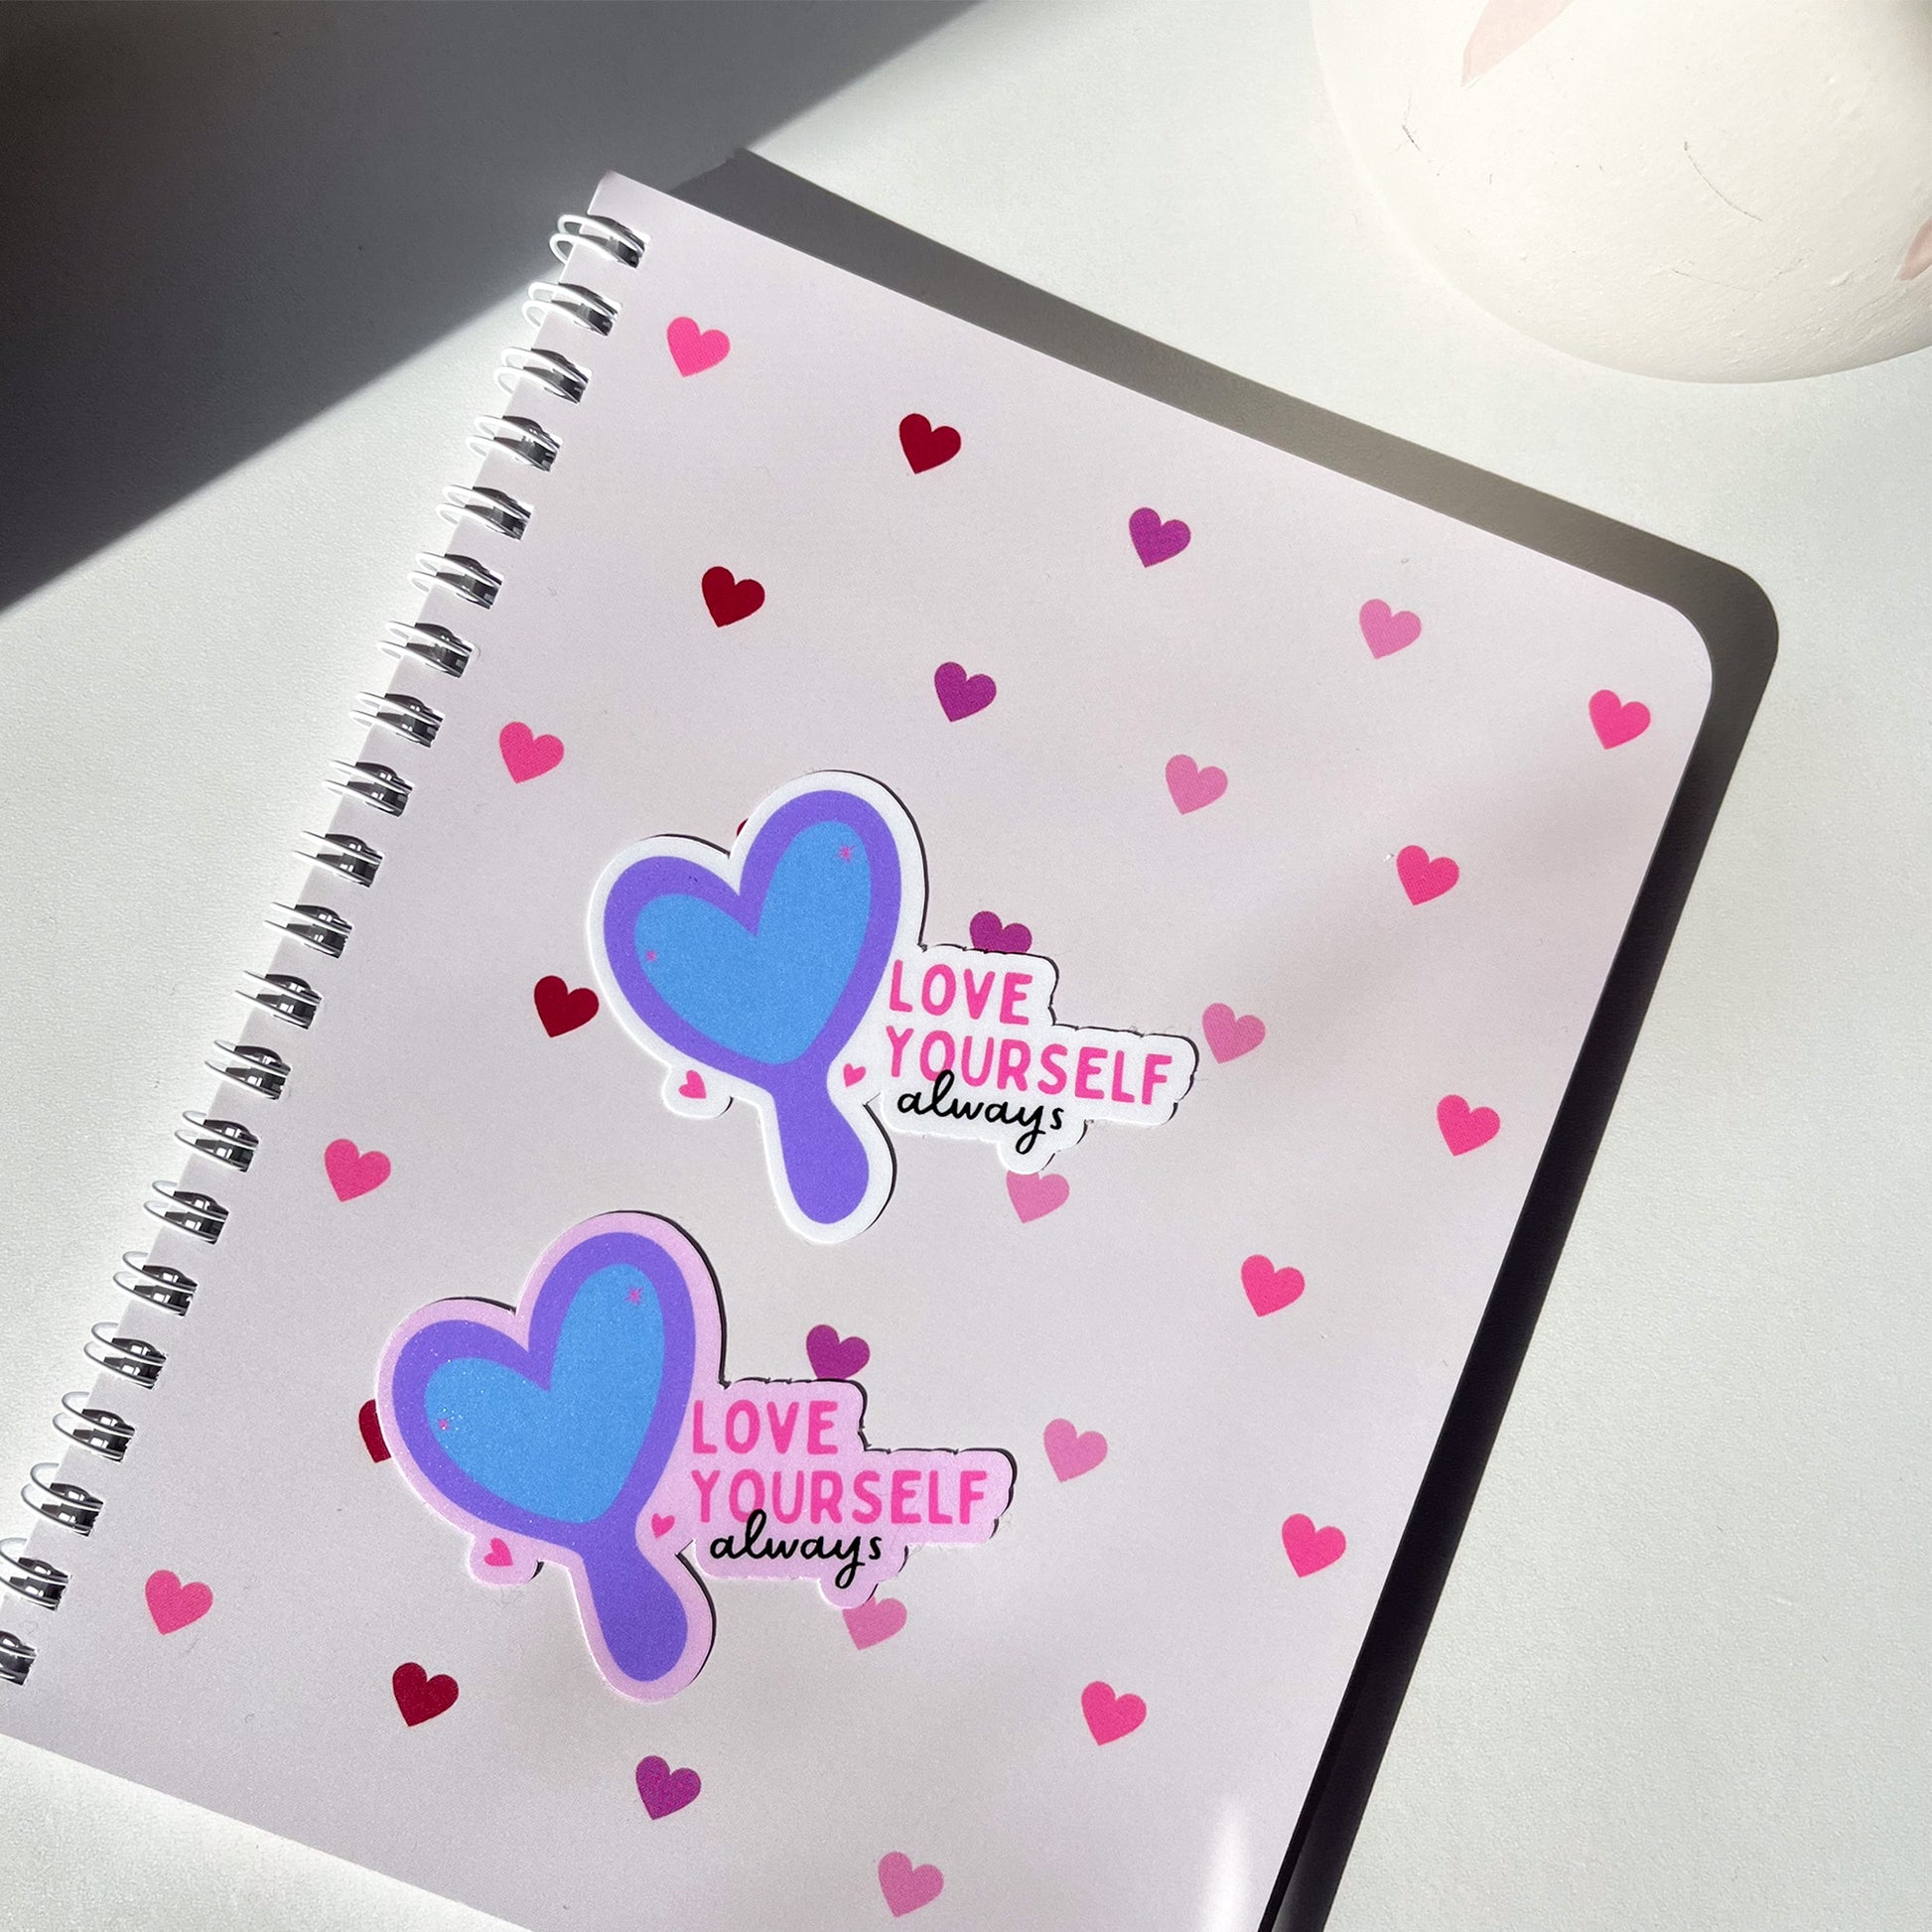 Love Yourself Always mirror sticker on top of pink hearts notebook from My Rainbow Journal